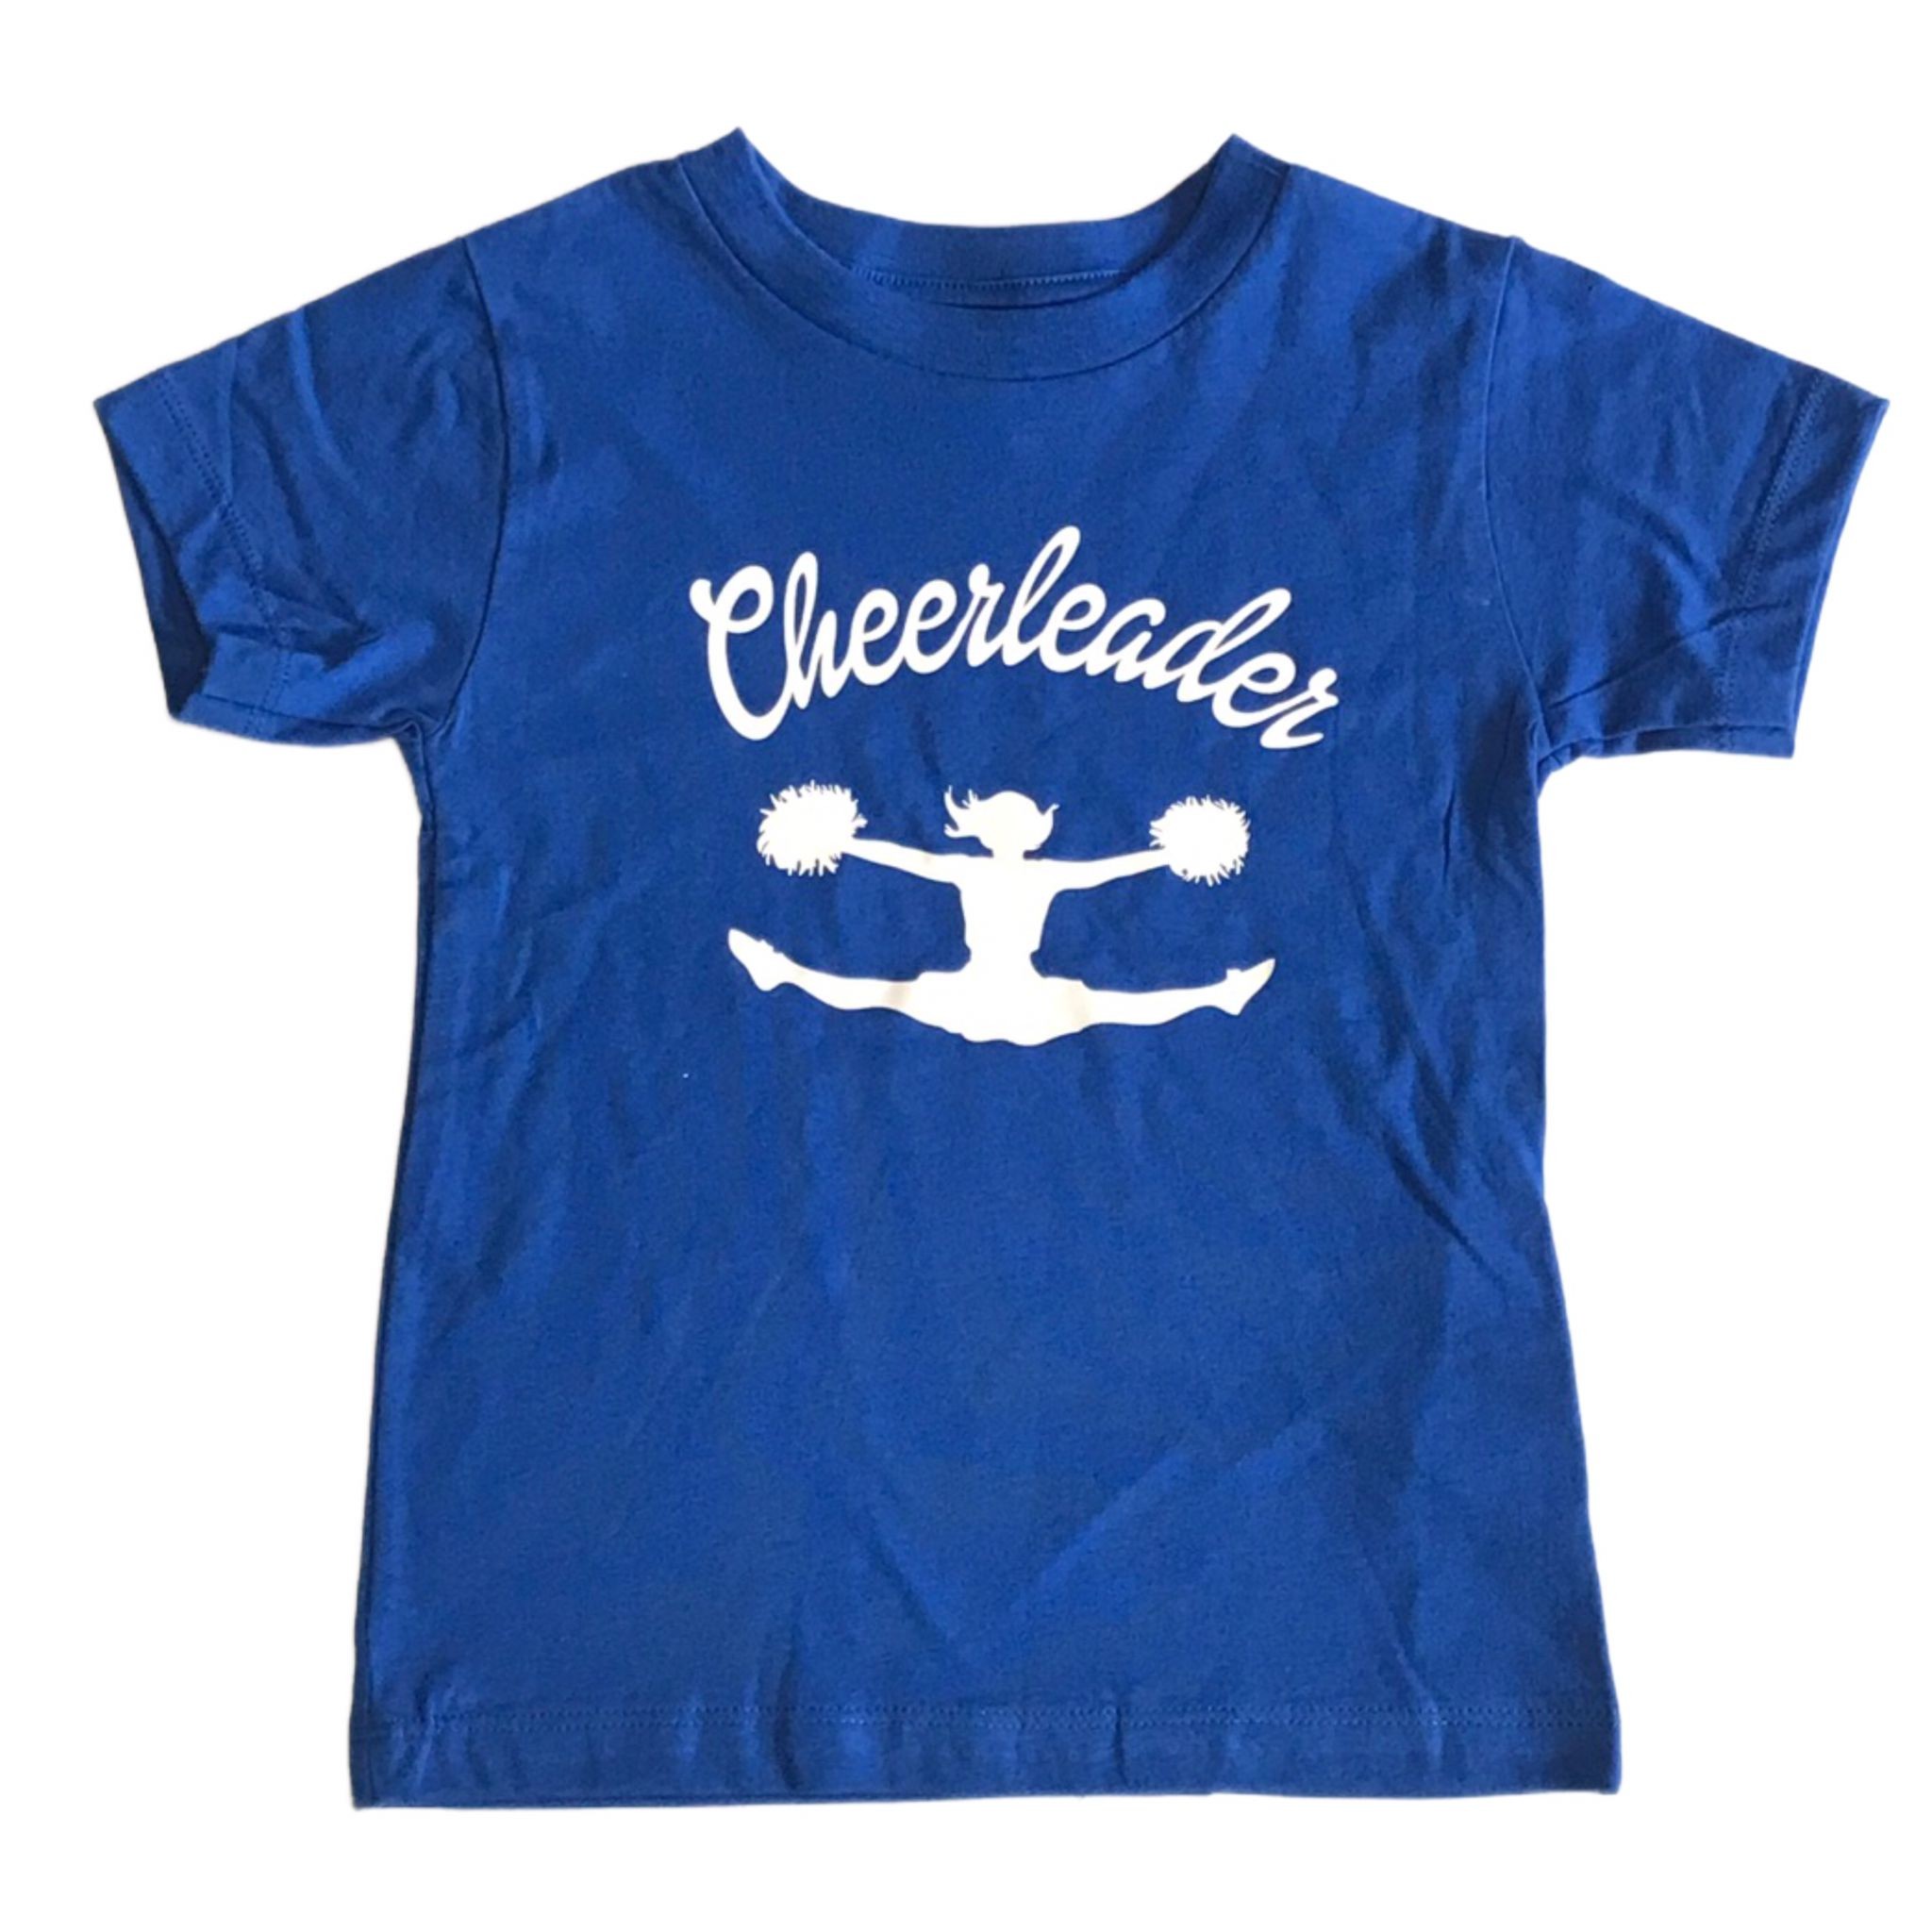 T-shirt Cheer - END OF STOCK